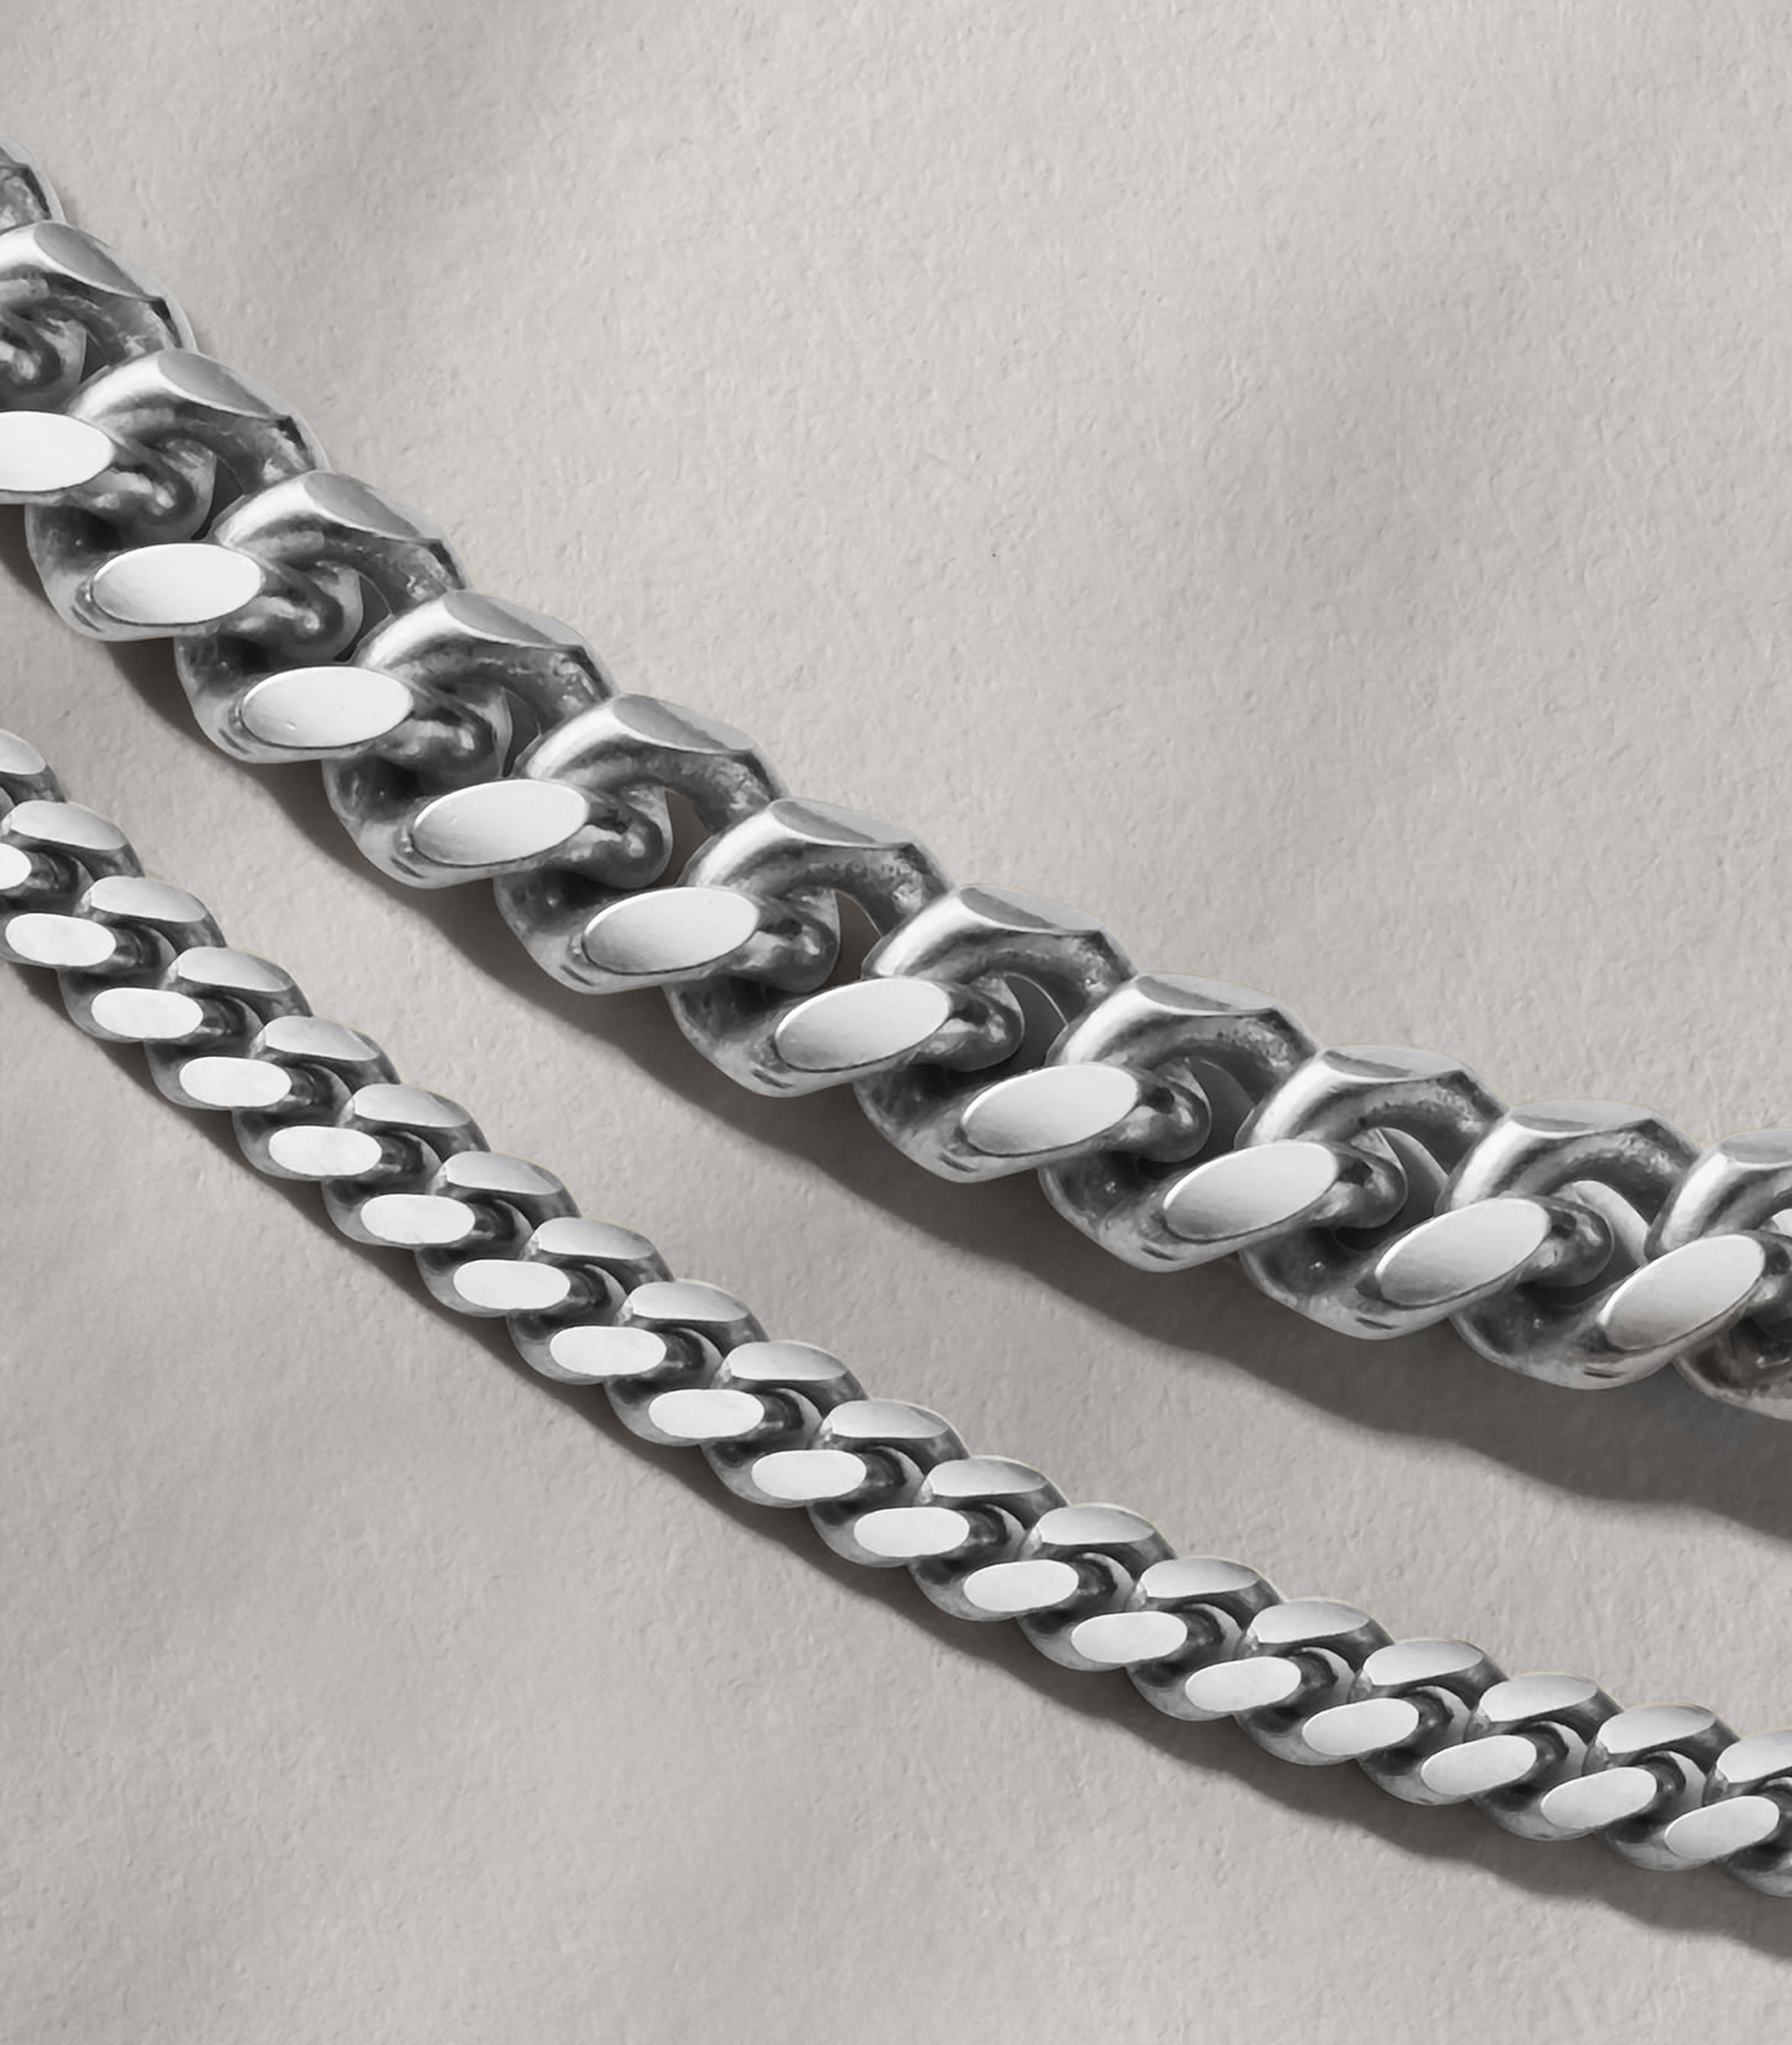 Image Cuban Chain Stack - 5mm 3mm Silver - Crafted in Italy